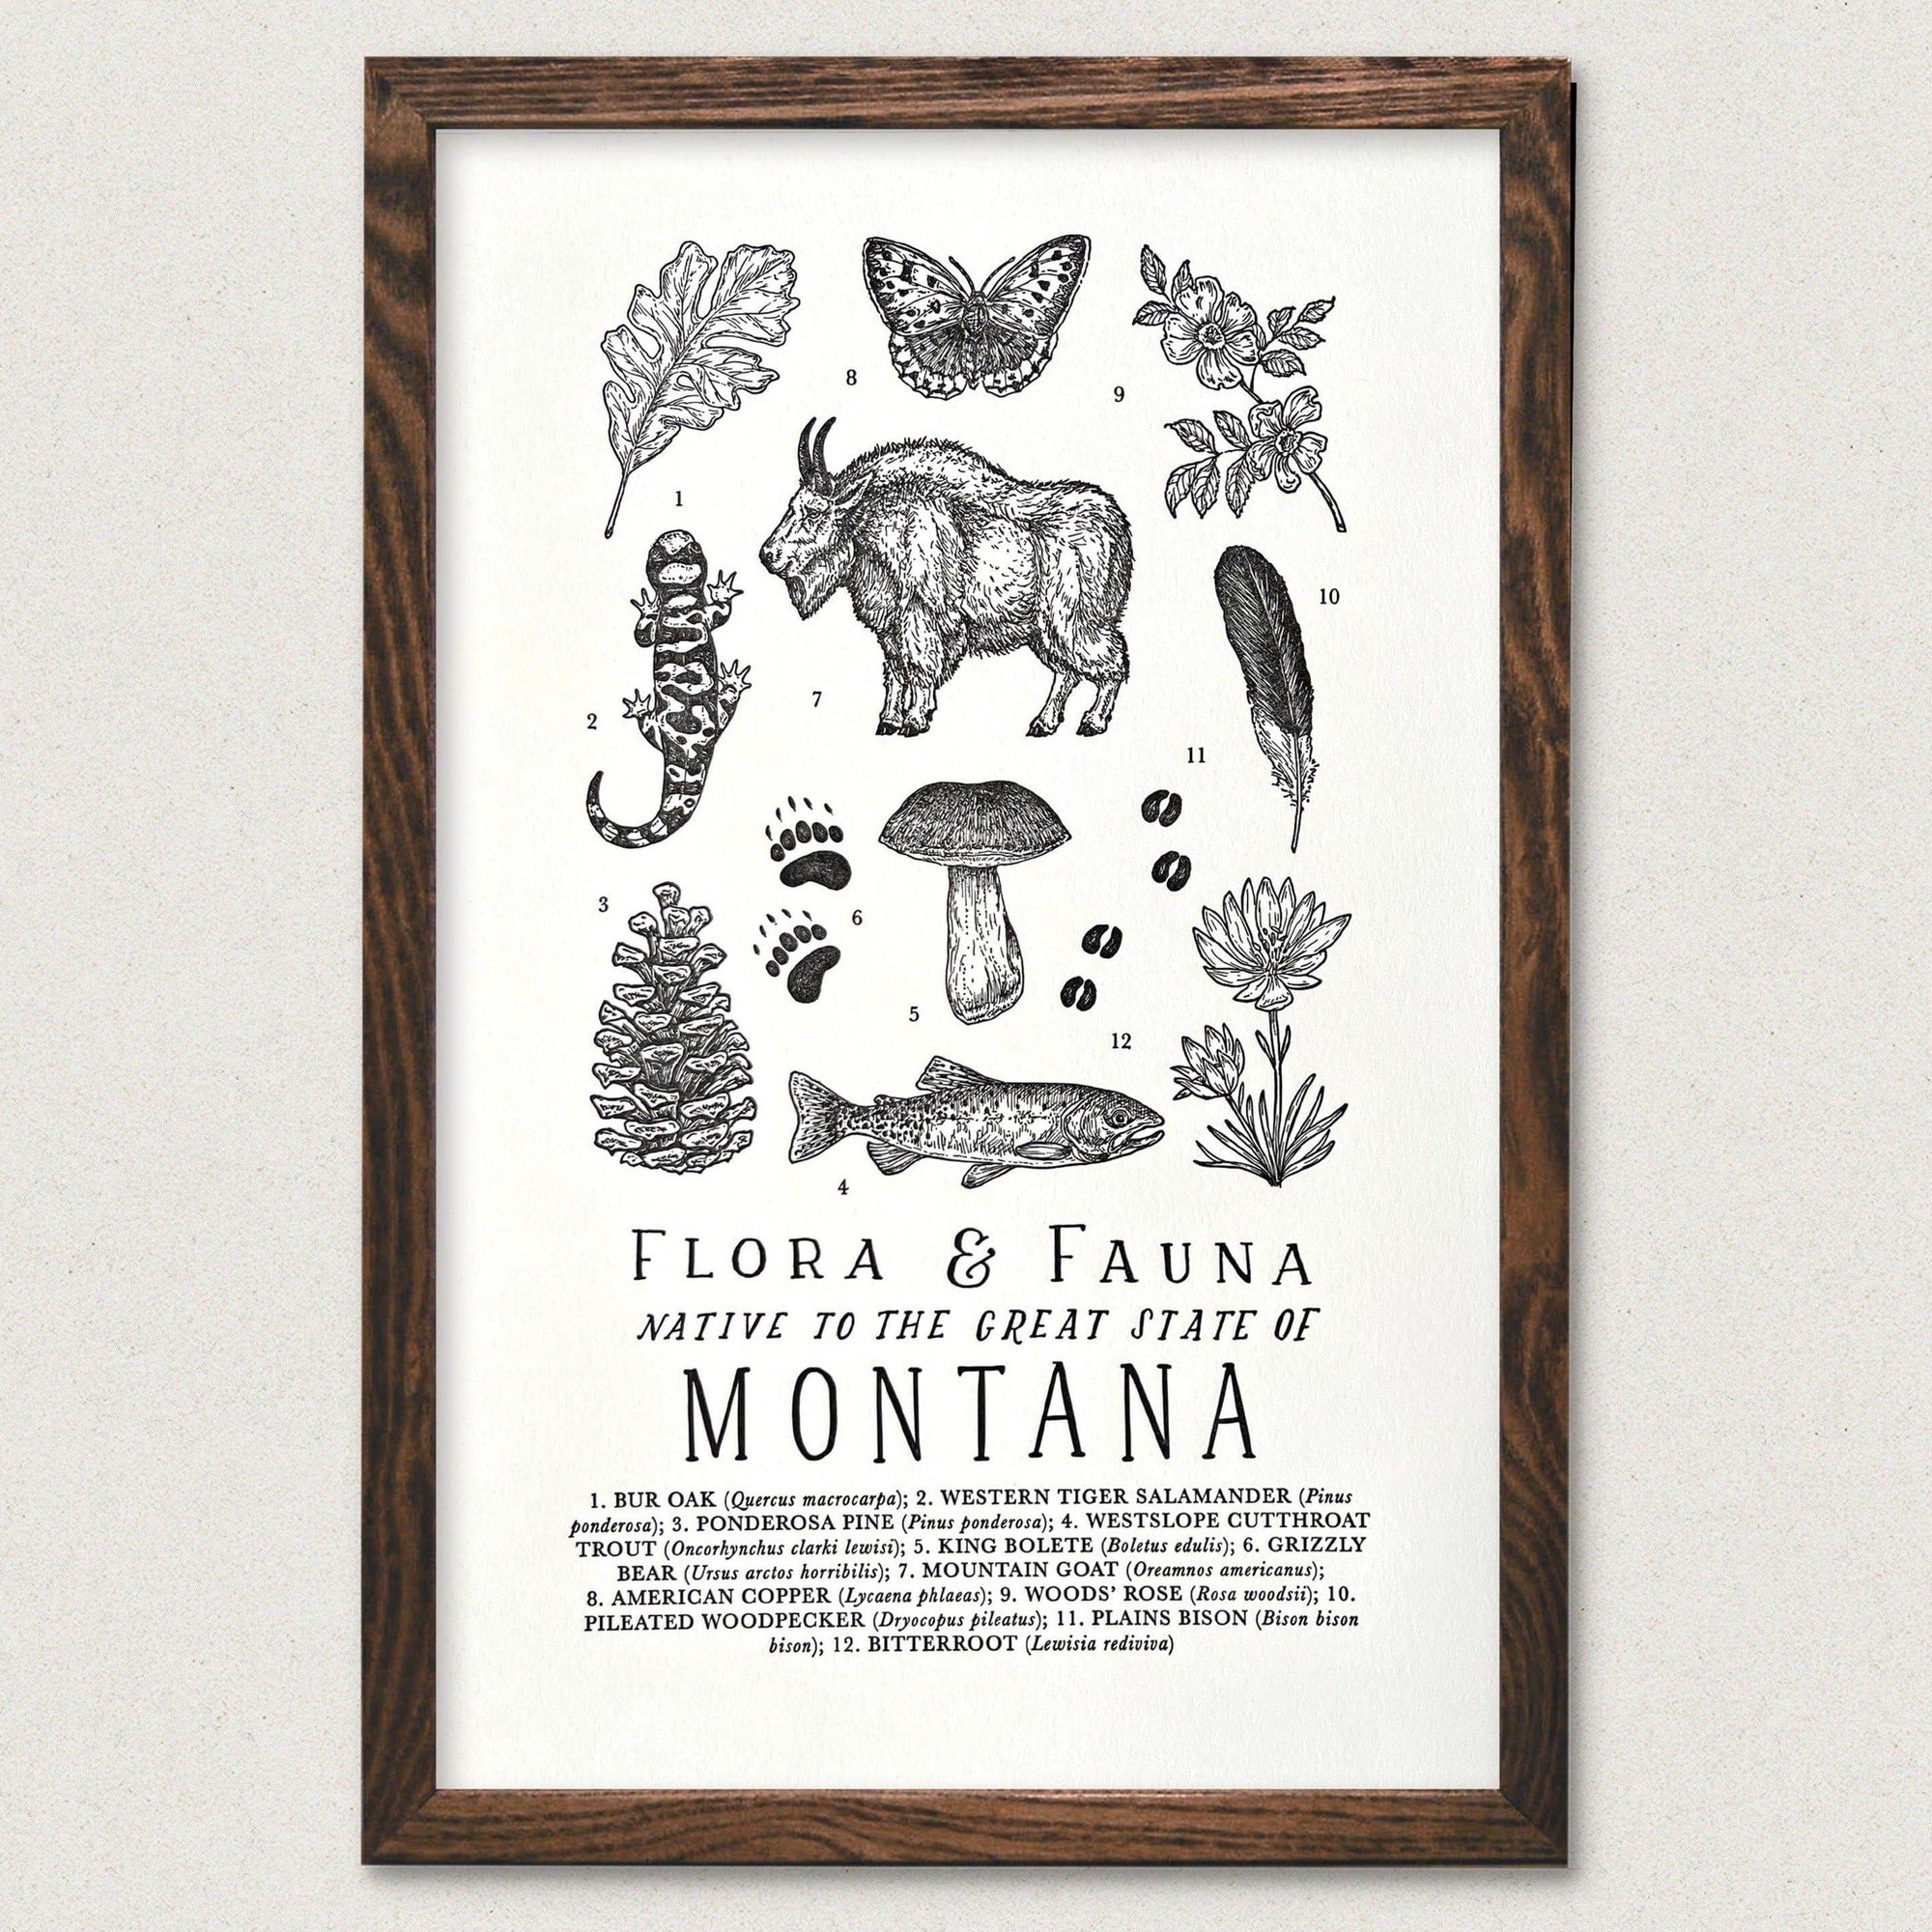 A Montana Field Guide Letterpress Print of various animals and plants by The Wild Wander.